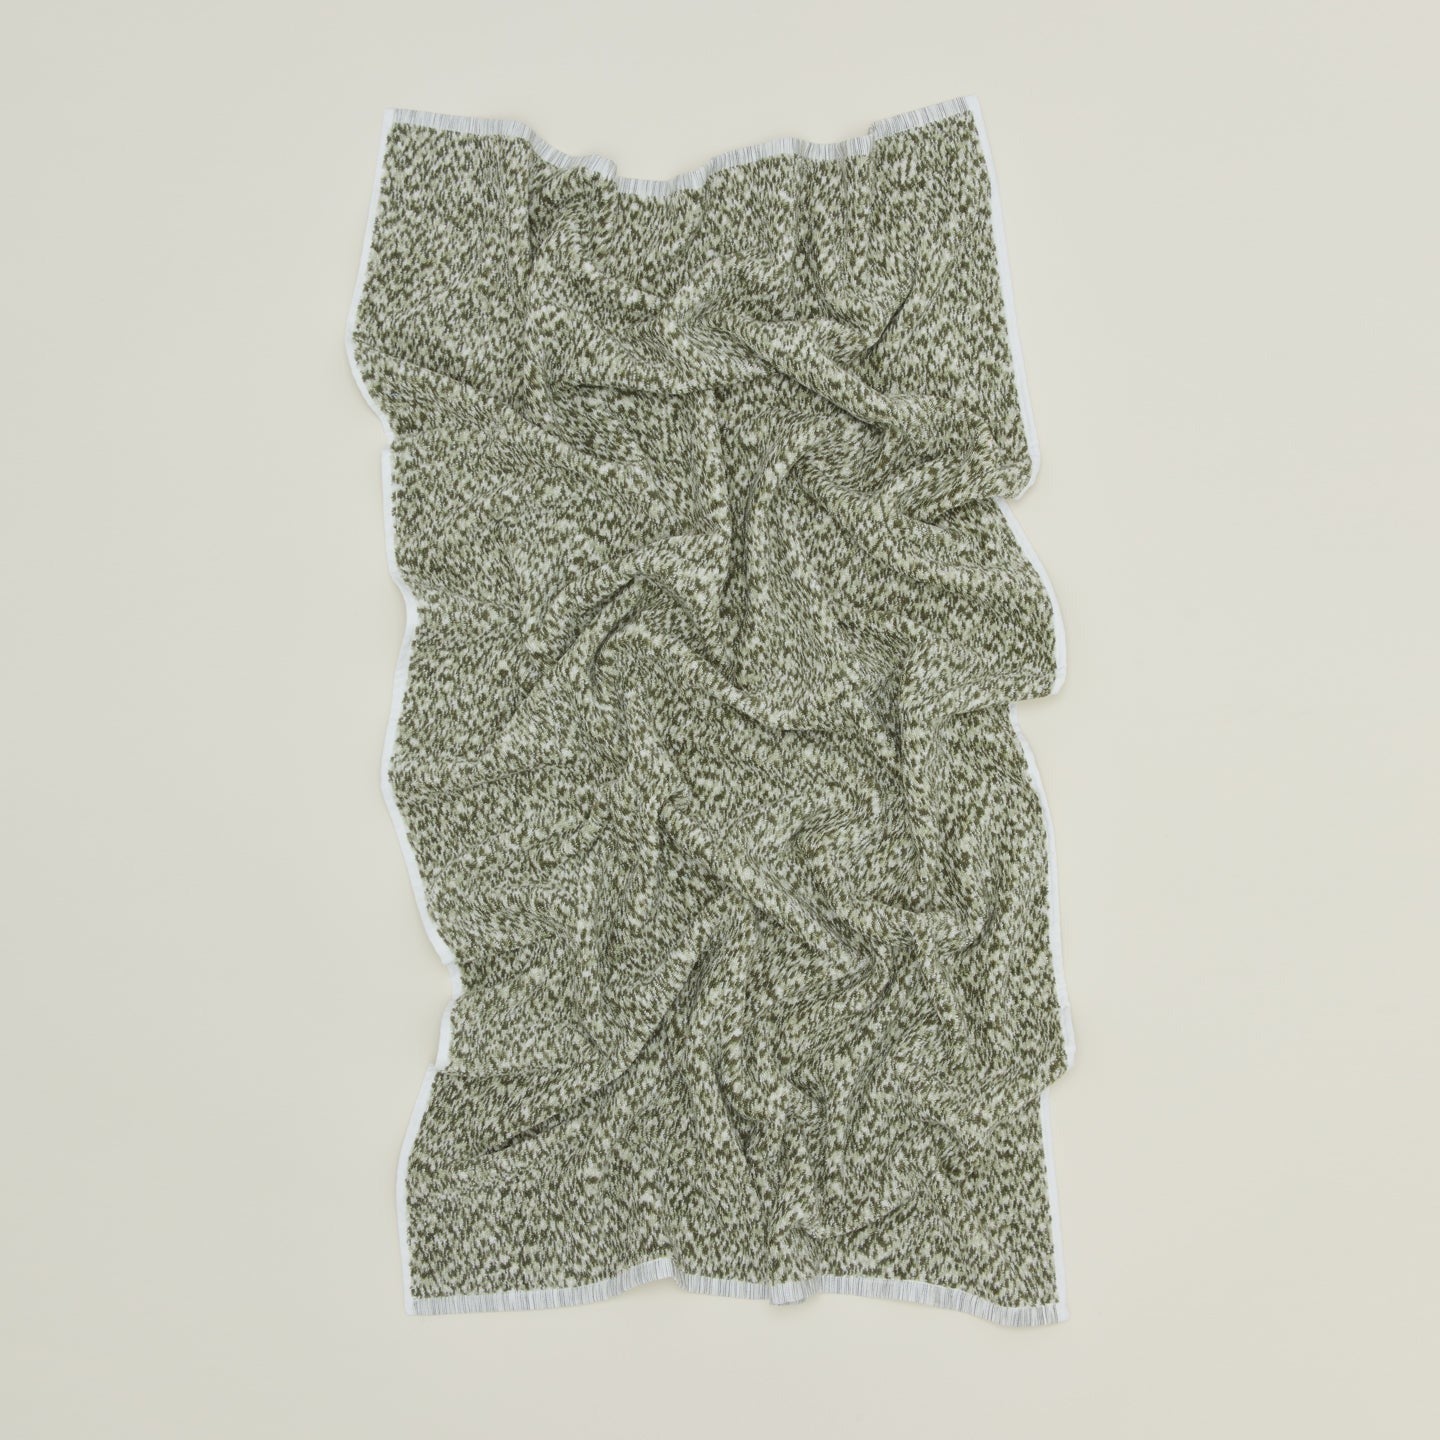 Space Dye Terry Towel - Olive